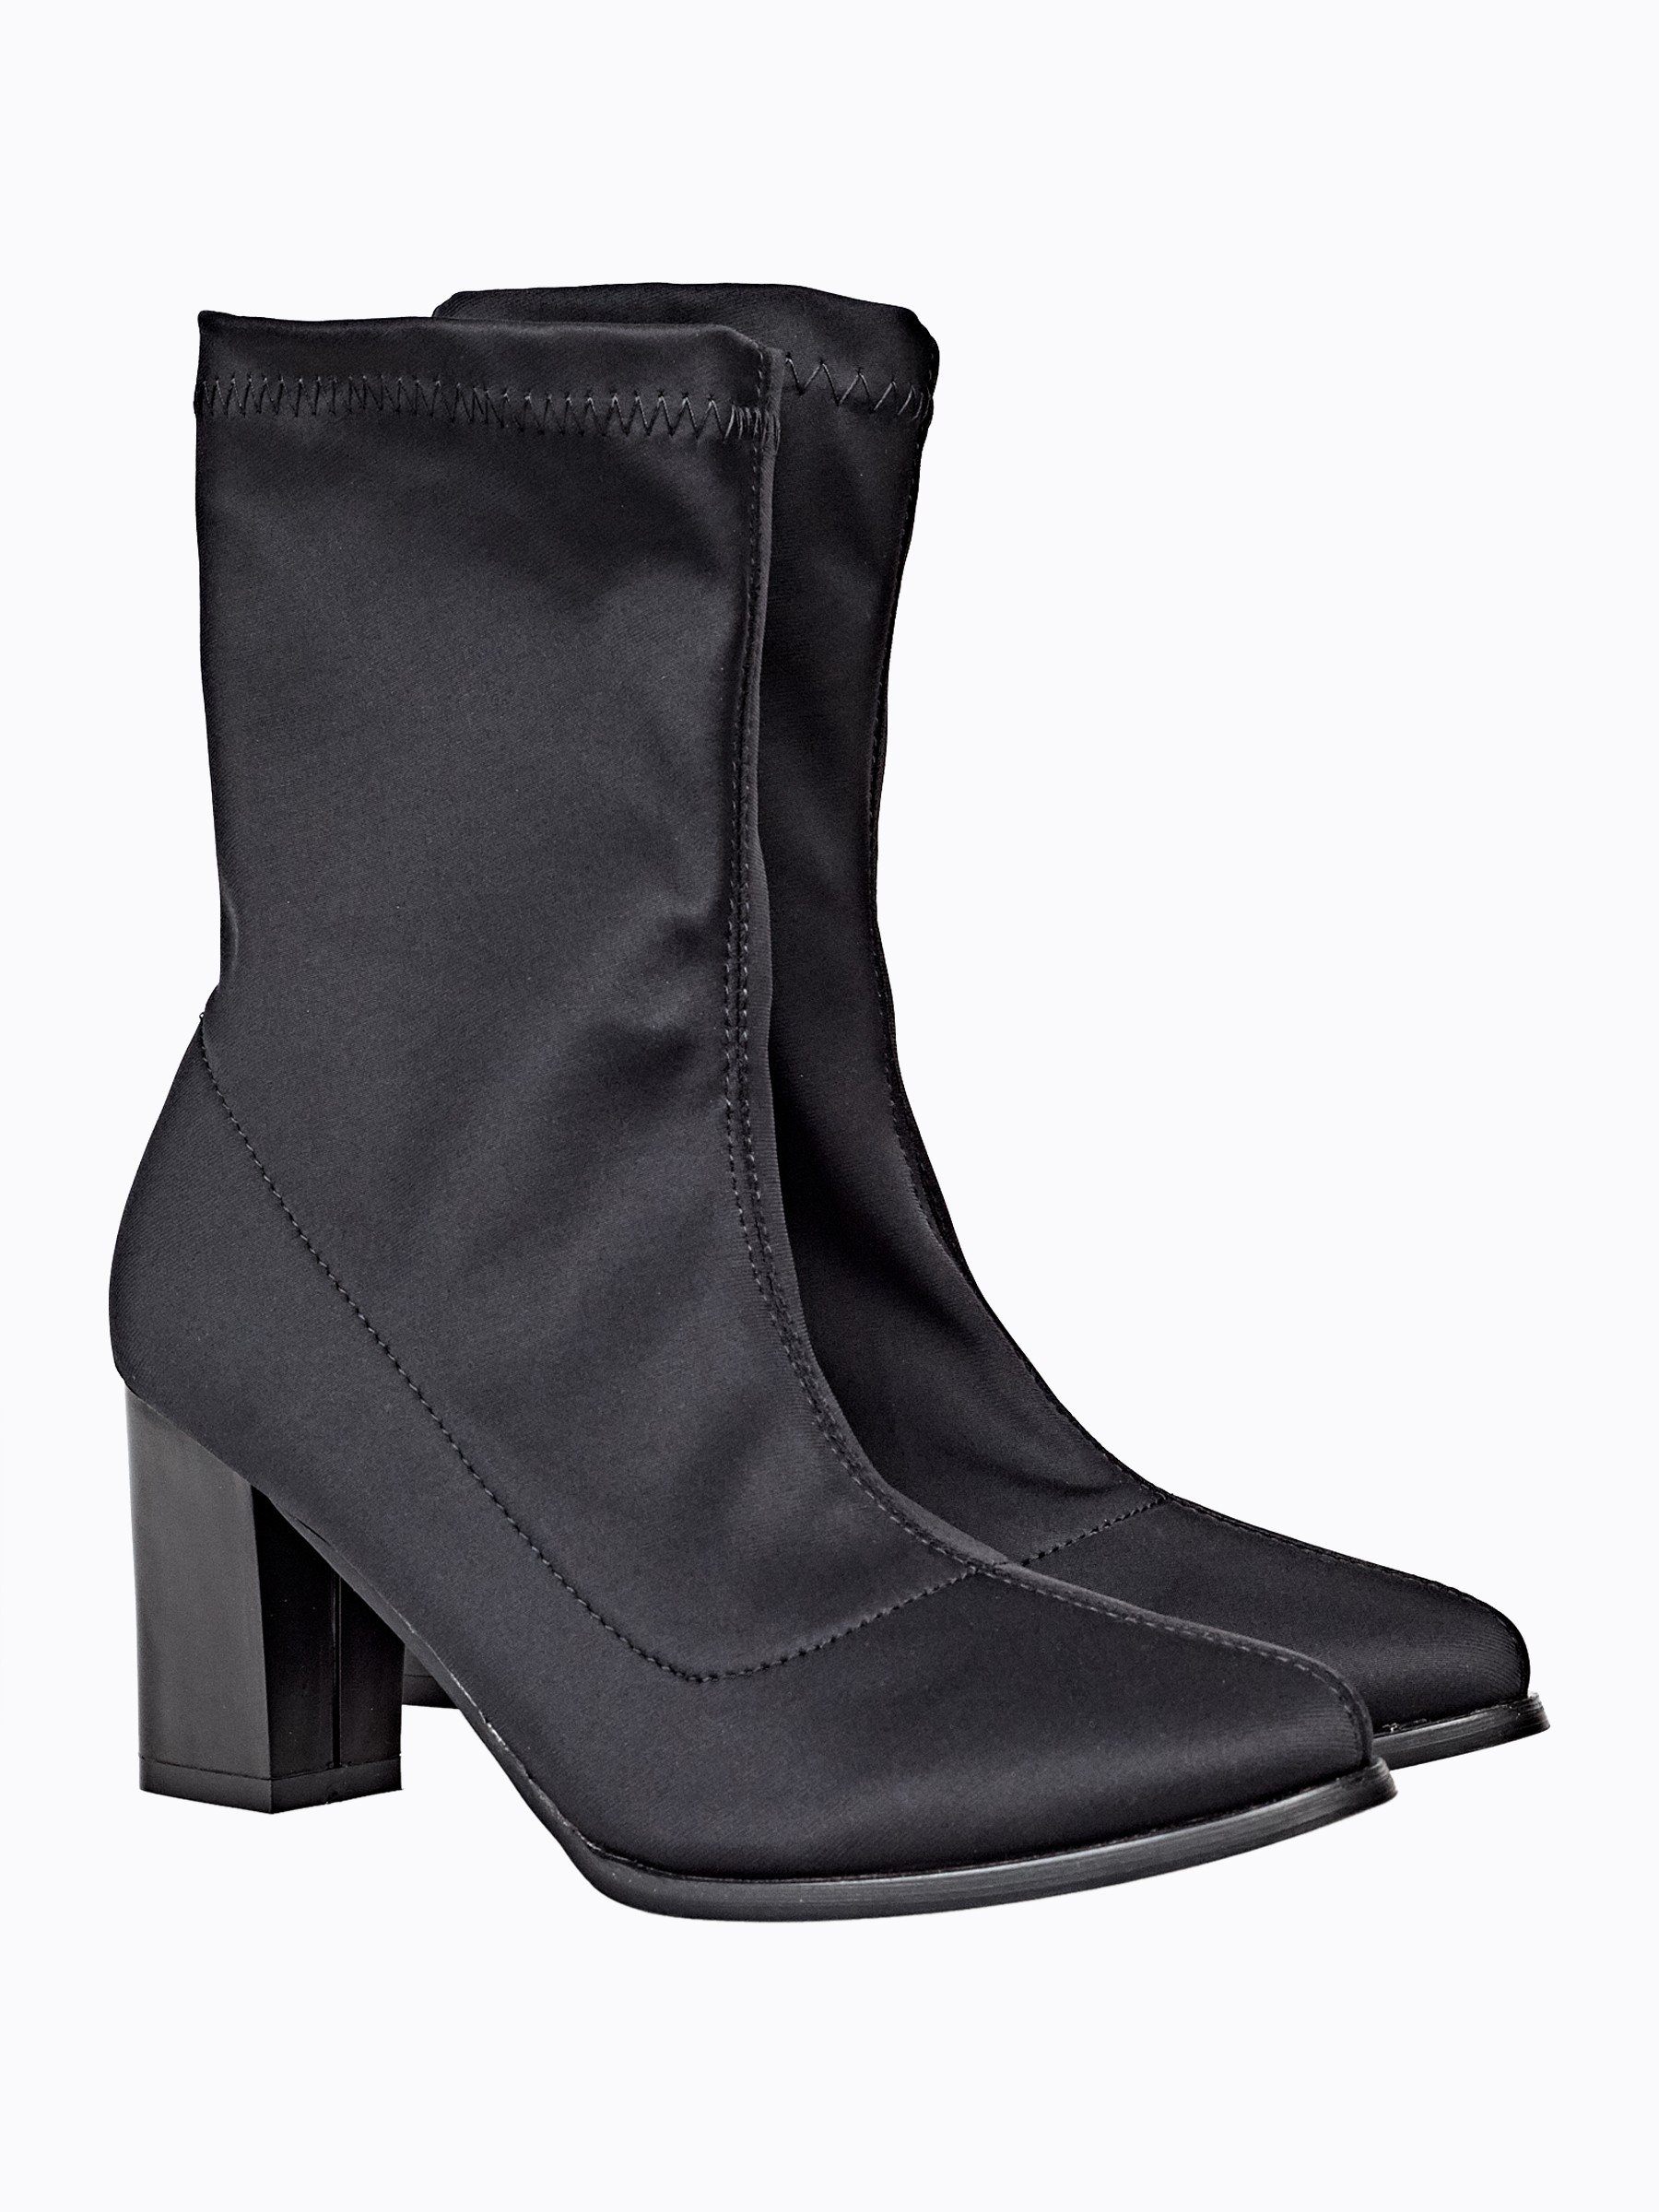 high heel sock style ankle boots